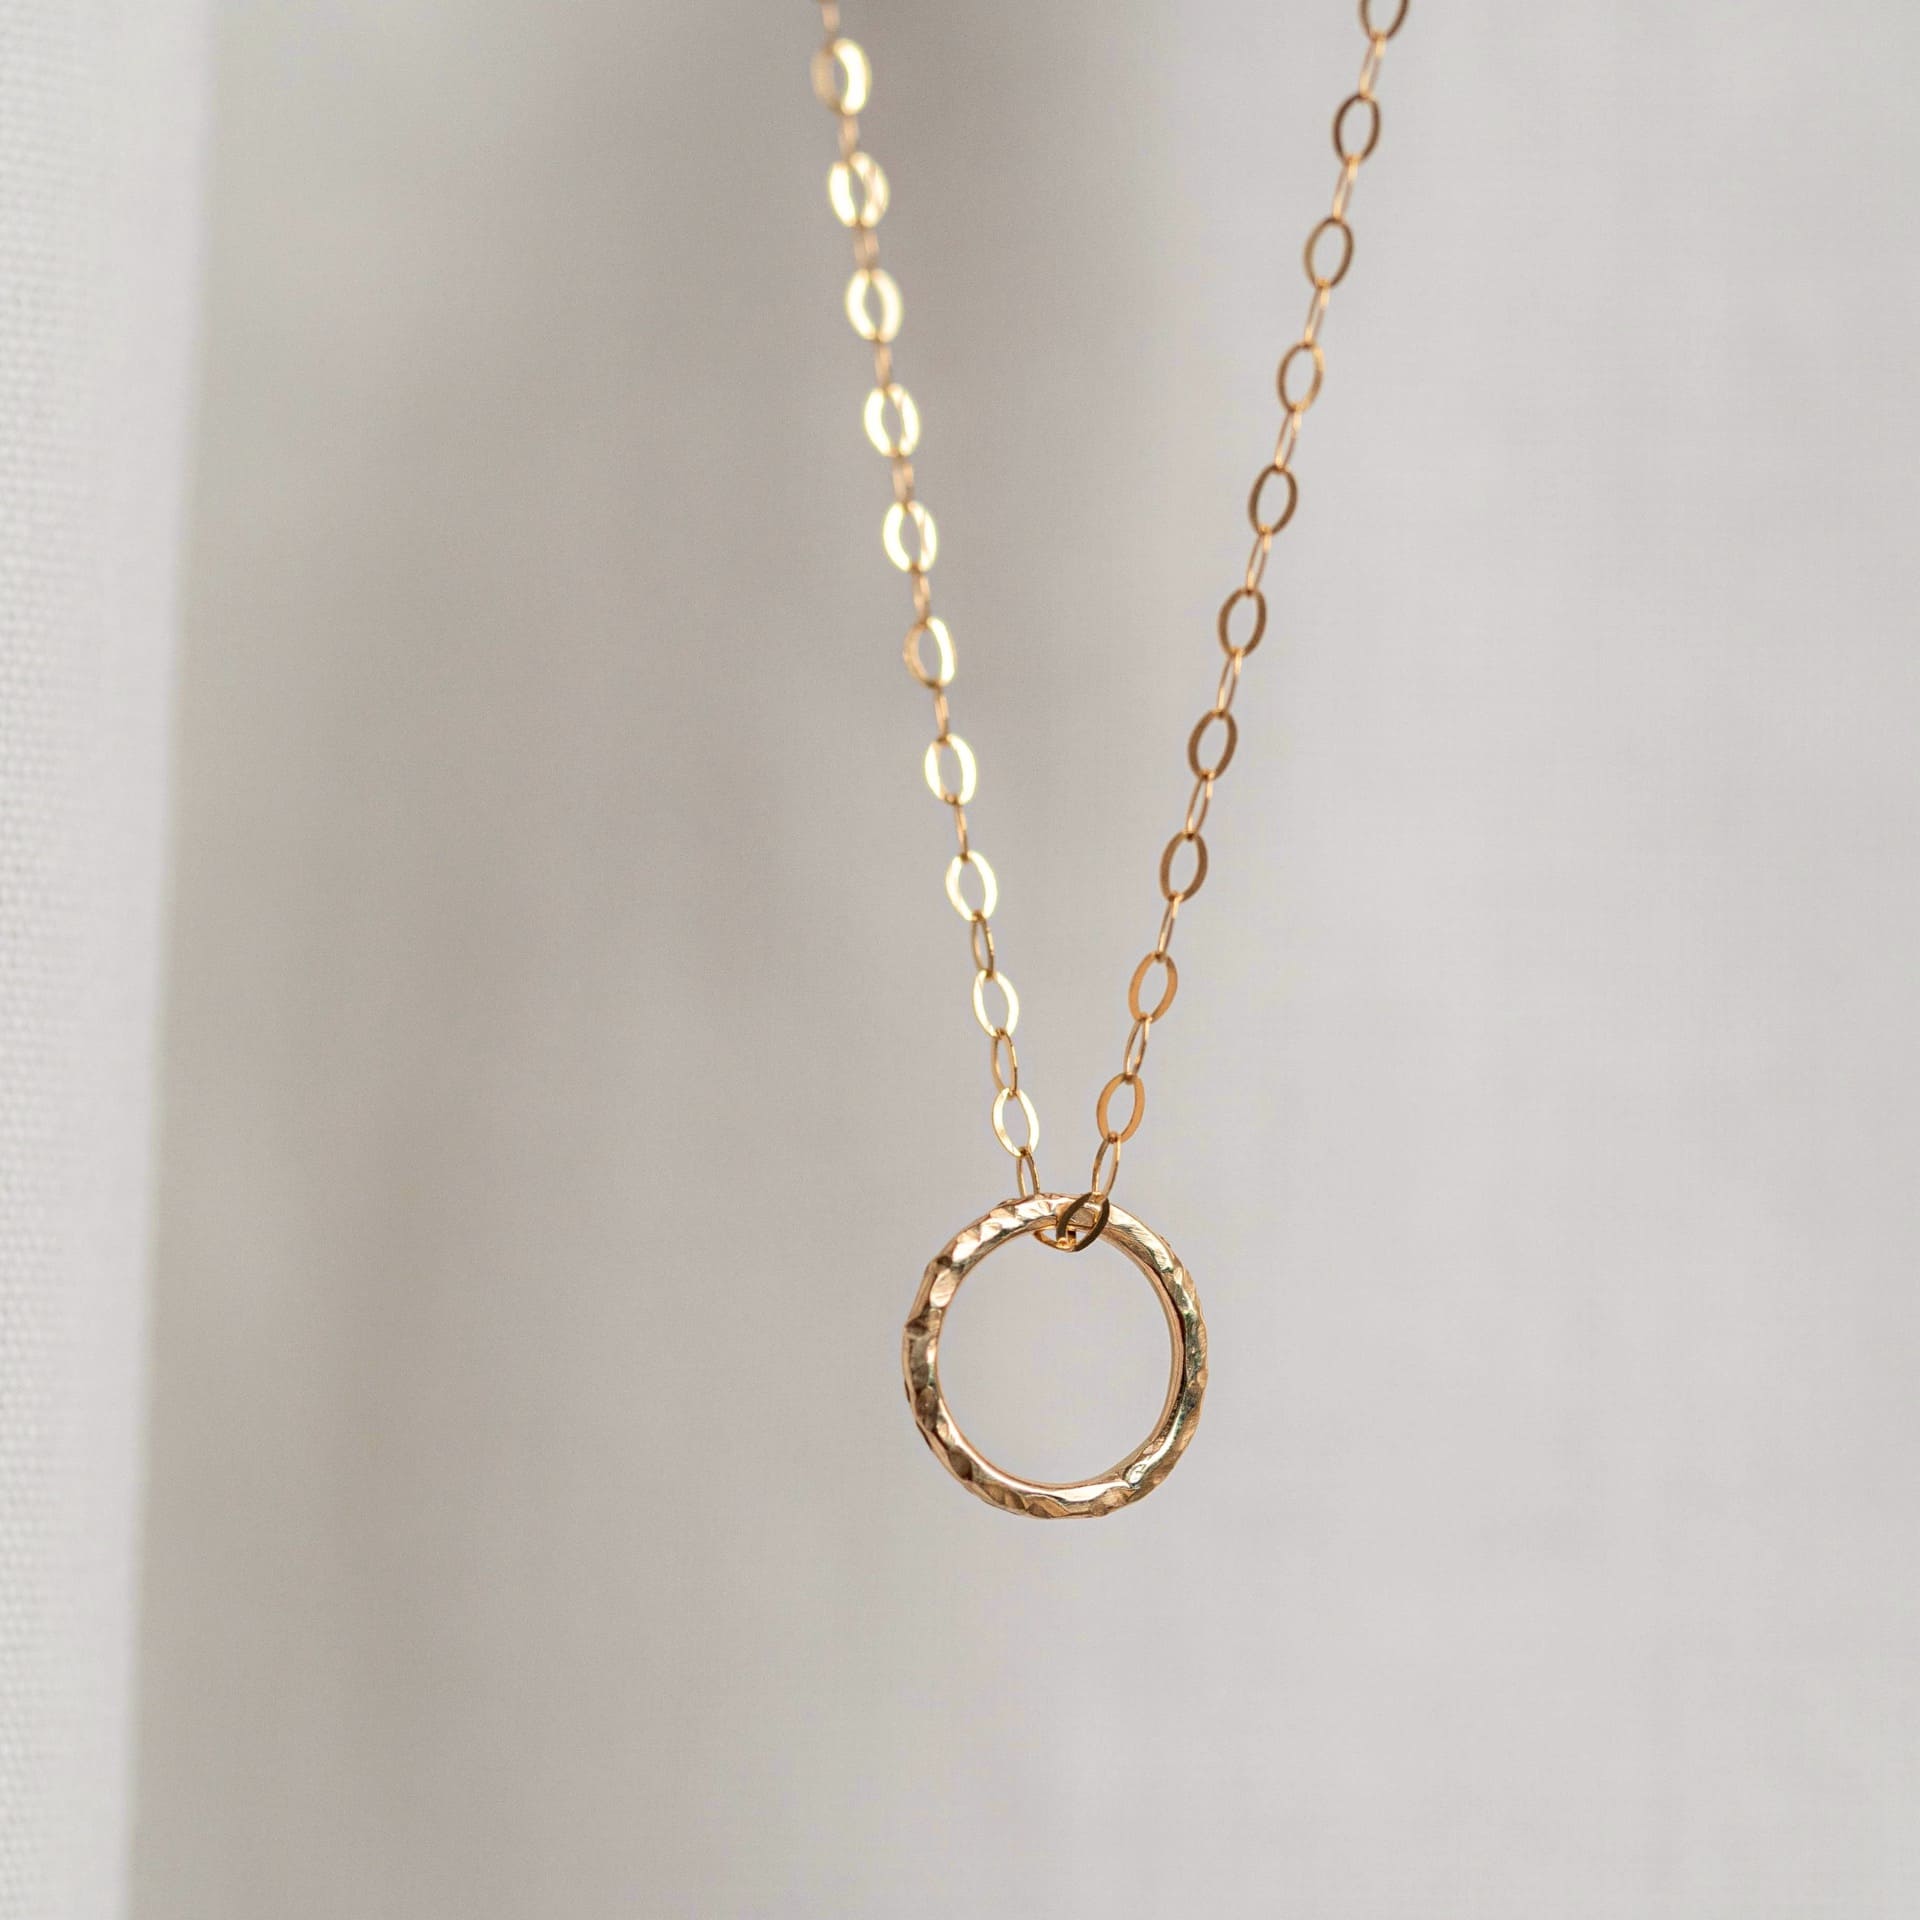 Buy Diamond and 9ct Gold Necklace, Hammered Solid Gold Circle Pendant,  0.16ct Diamond Necklace in 9ct Gold Online in India - Etsy